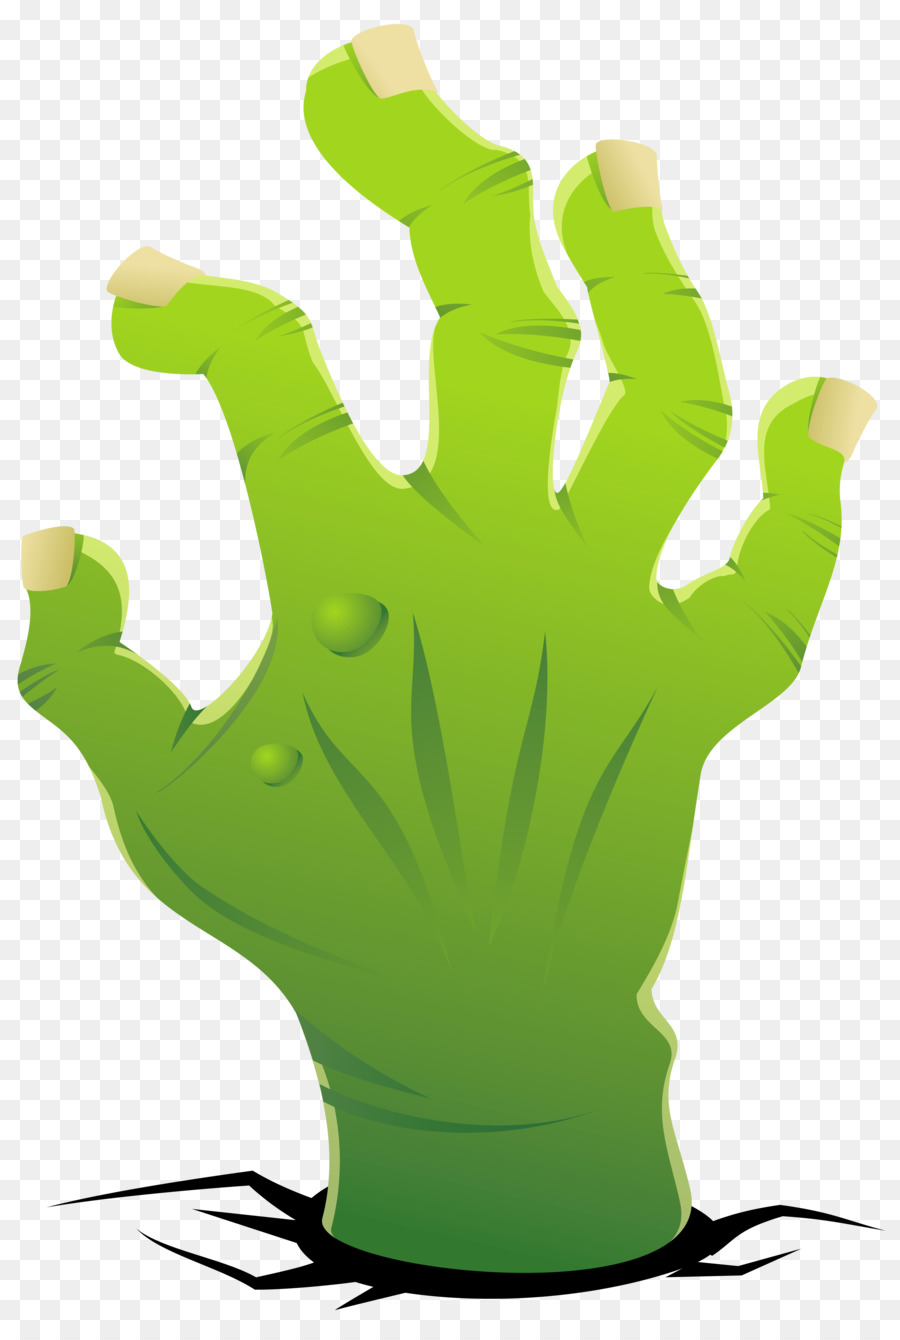 Plants vs. Zombies Computer Icons Clip art - Halloween Hand Cliparts png download - 3979*5899 - Free Transparent  png Download.